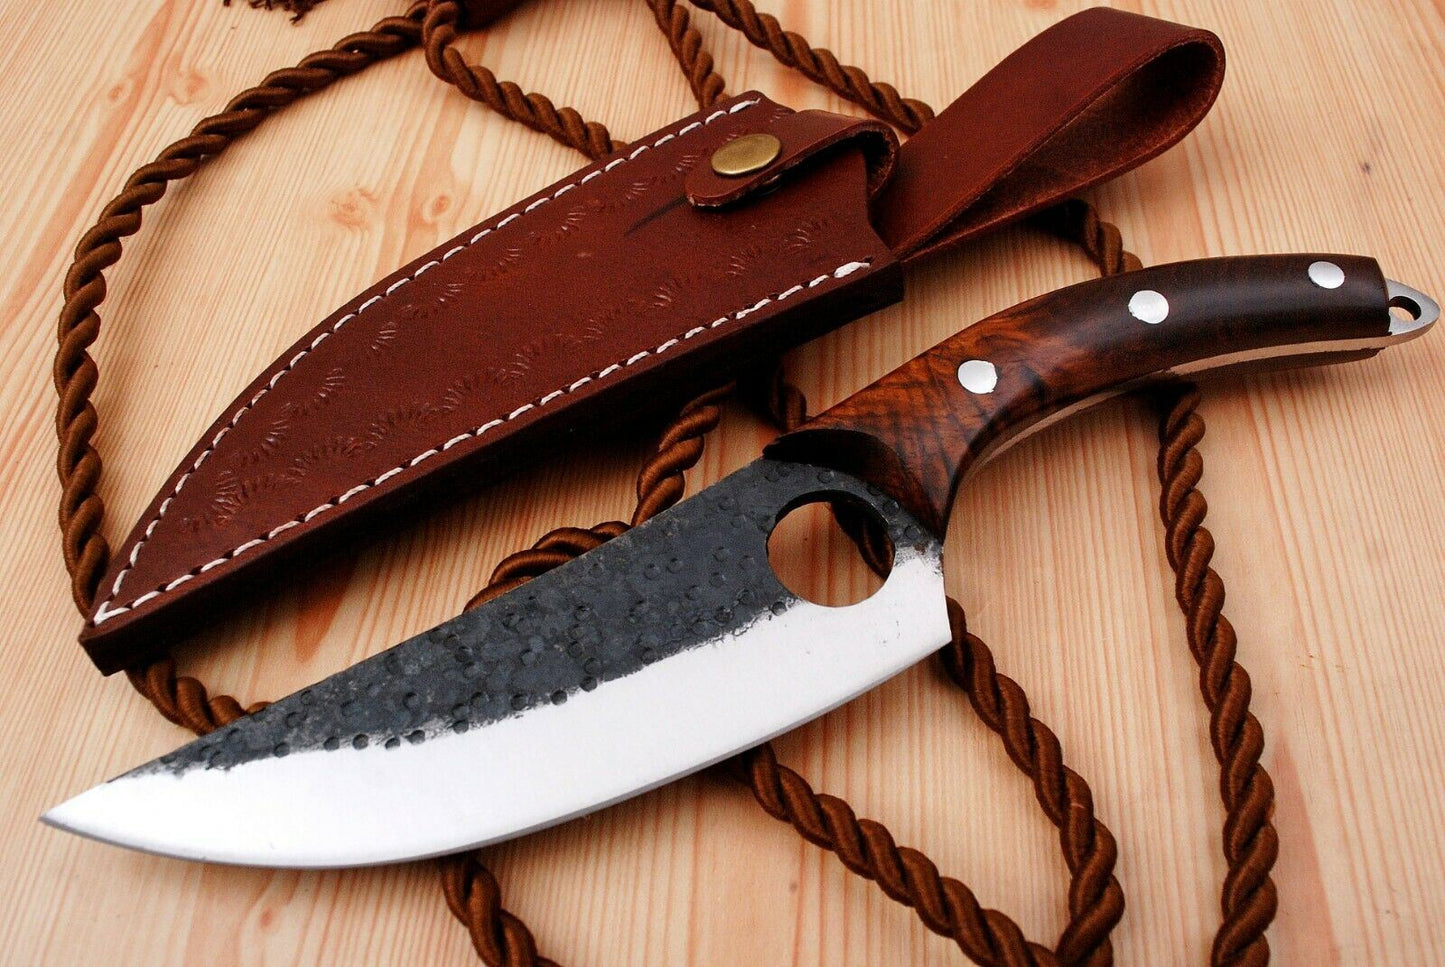 SHARD BLADE Hand Forged D2 Steel Full Tang Hunting Boing Meat Clever Knife